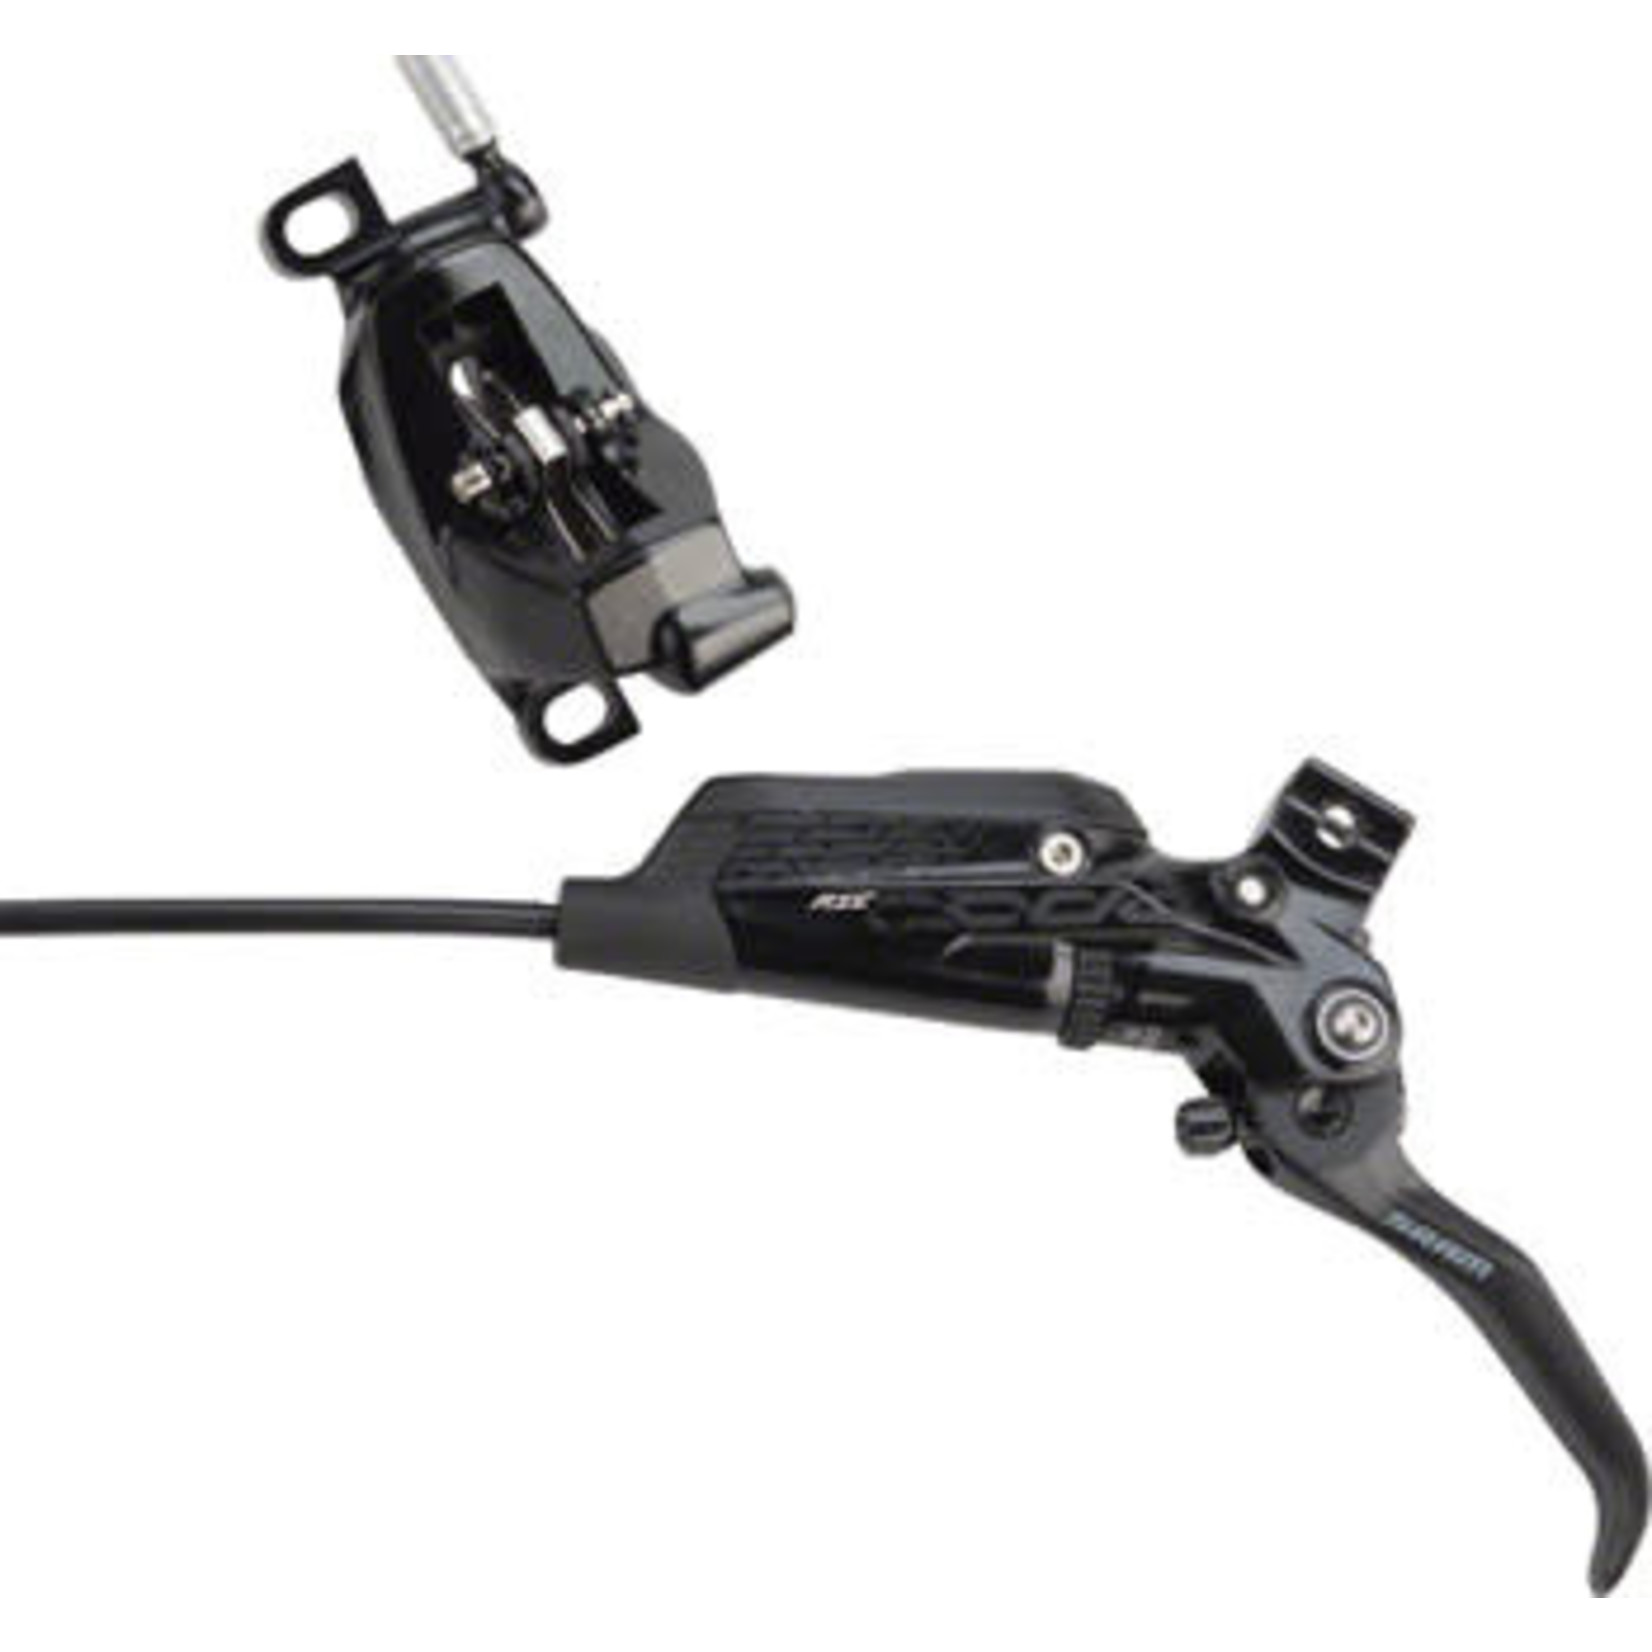 SRAM SRAM Code RSC Disc Brake and Lever - Front or Rear, Hydraulic, Post Mount, Black, A1